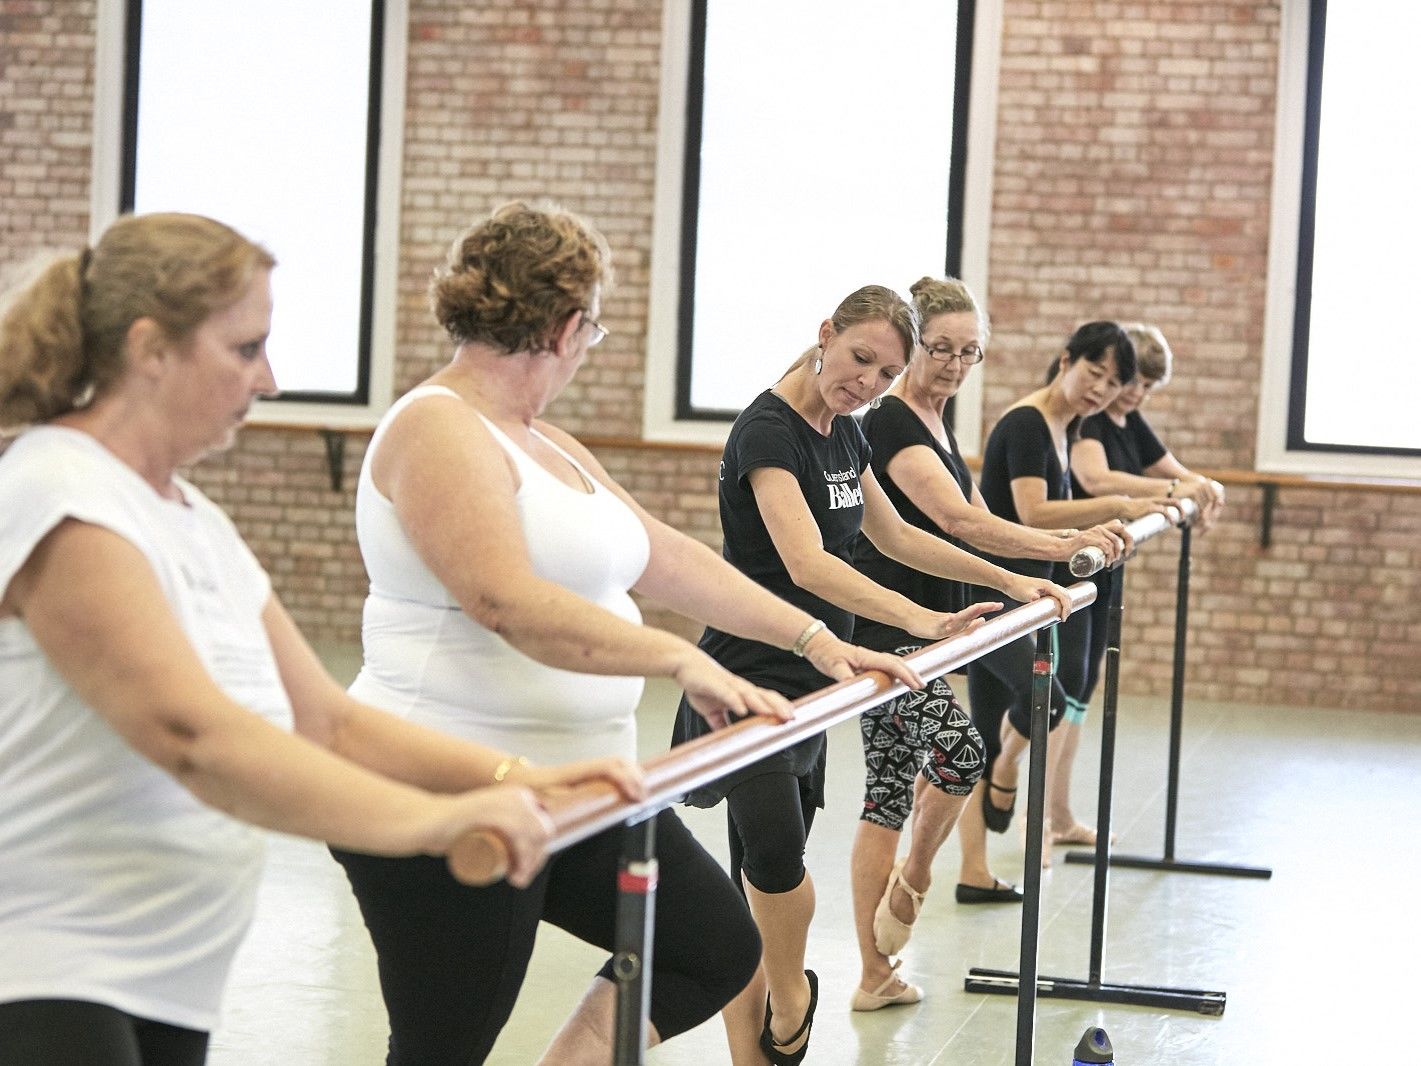 Teaching Ballet to Adults and Older Participants